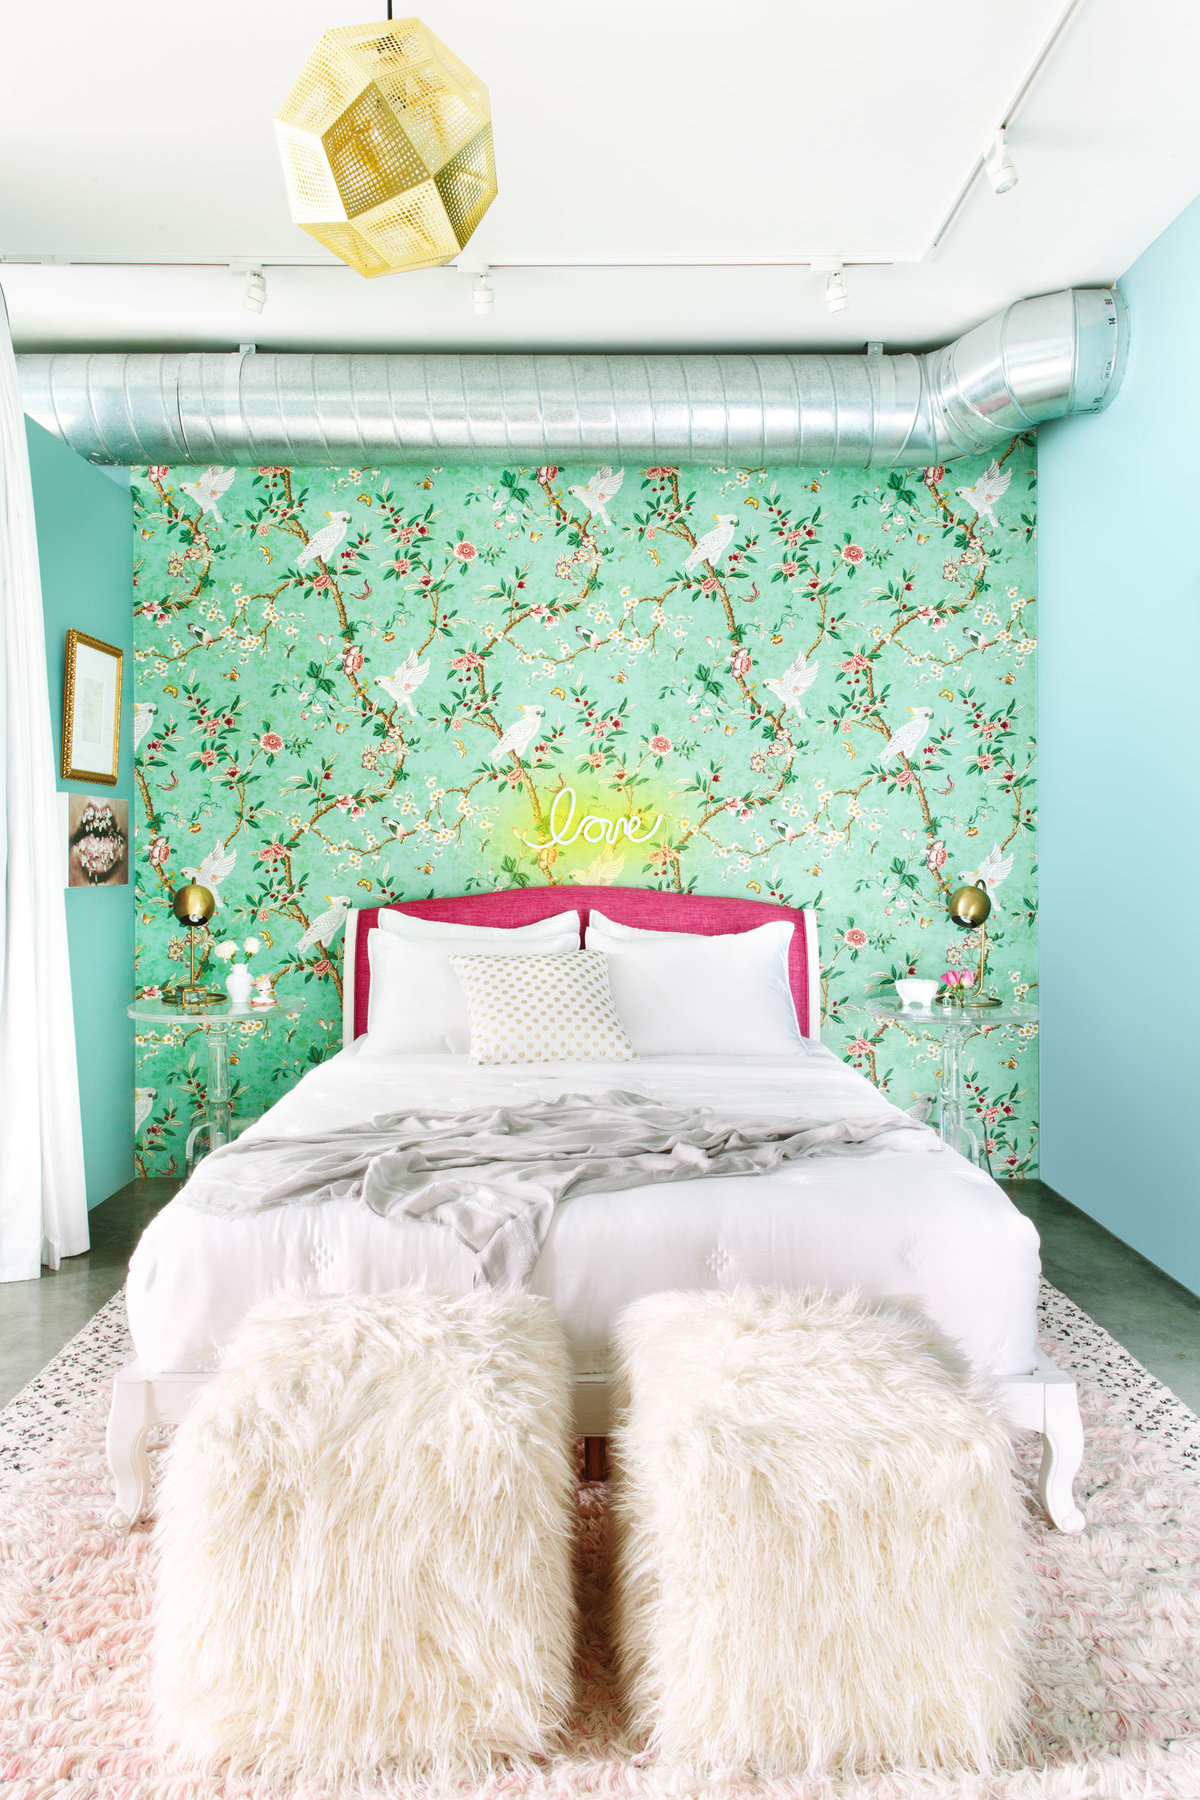 Bedroom with floral wallpaper, pink headboard, and Lucite acrylic nightstand